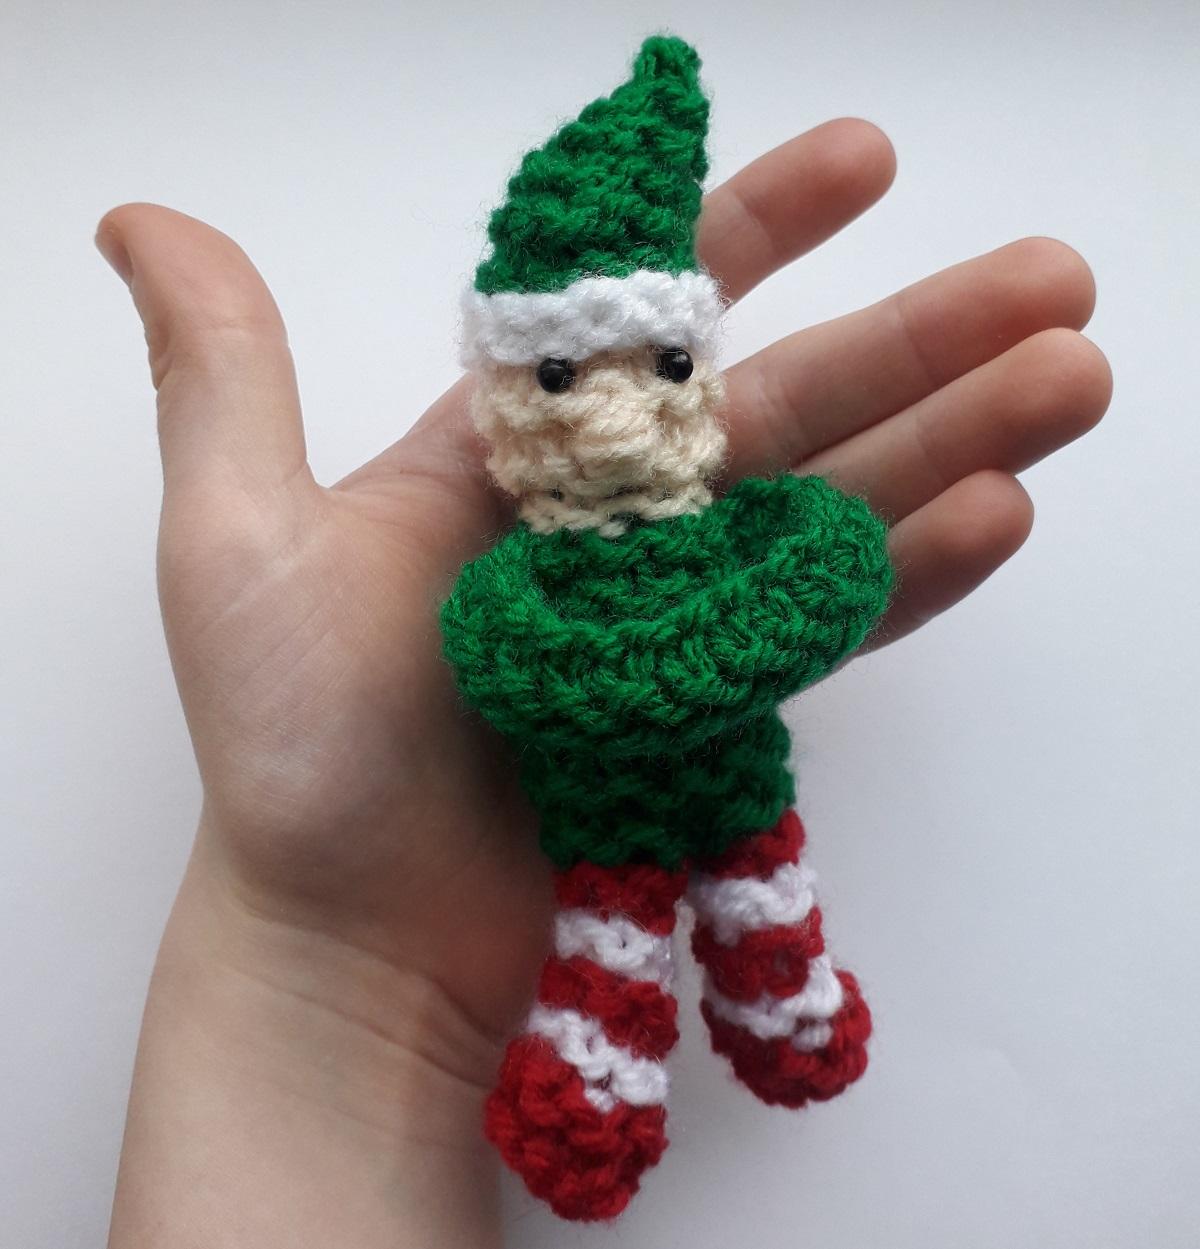 Knit your own Snuggle Elf for people with dementia